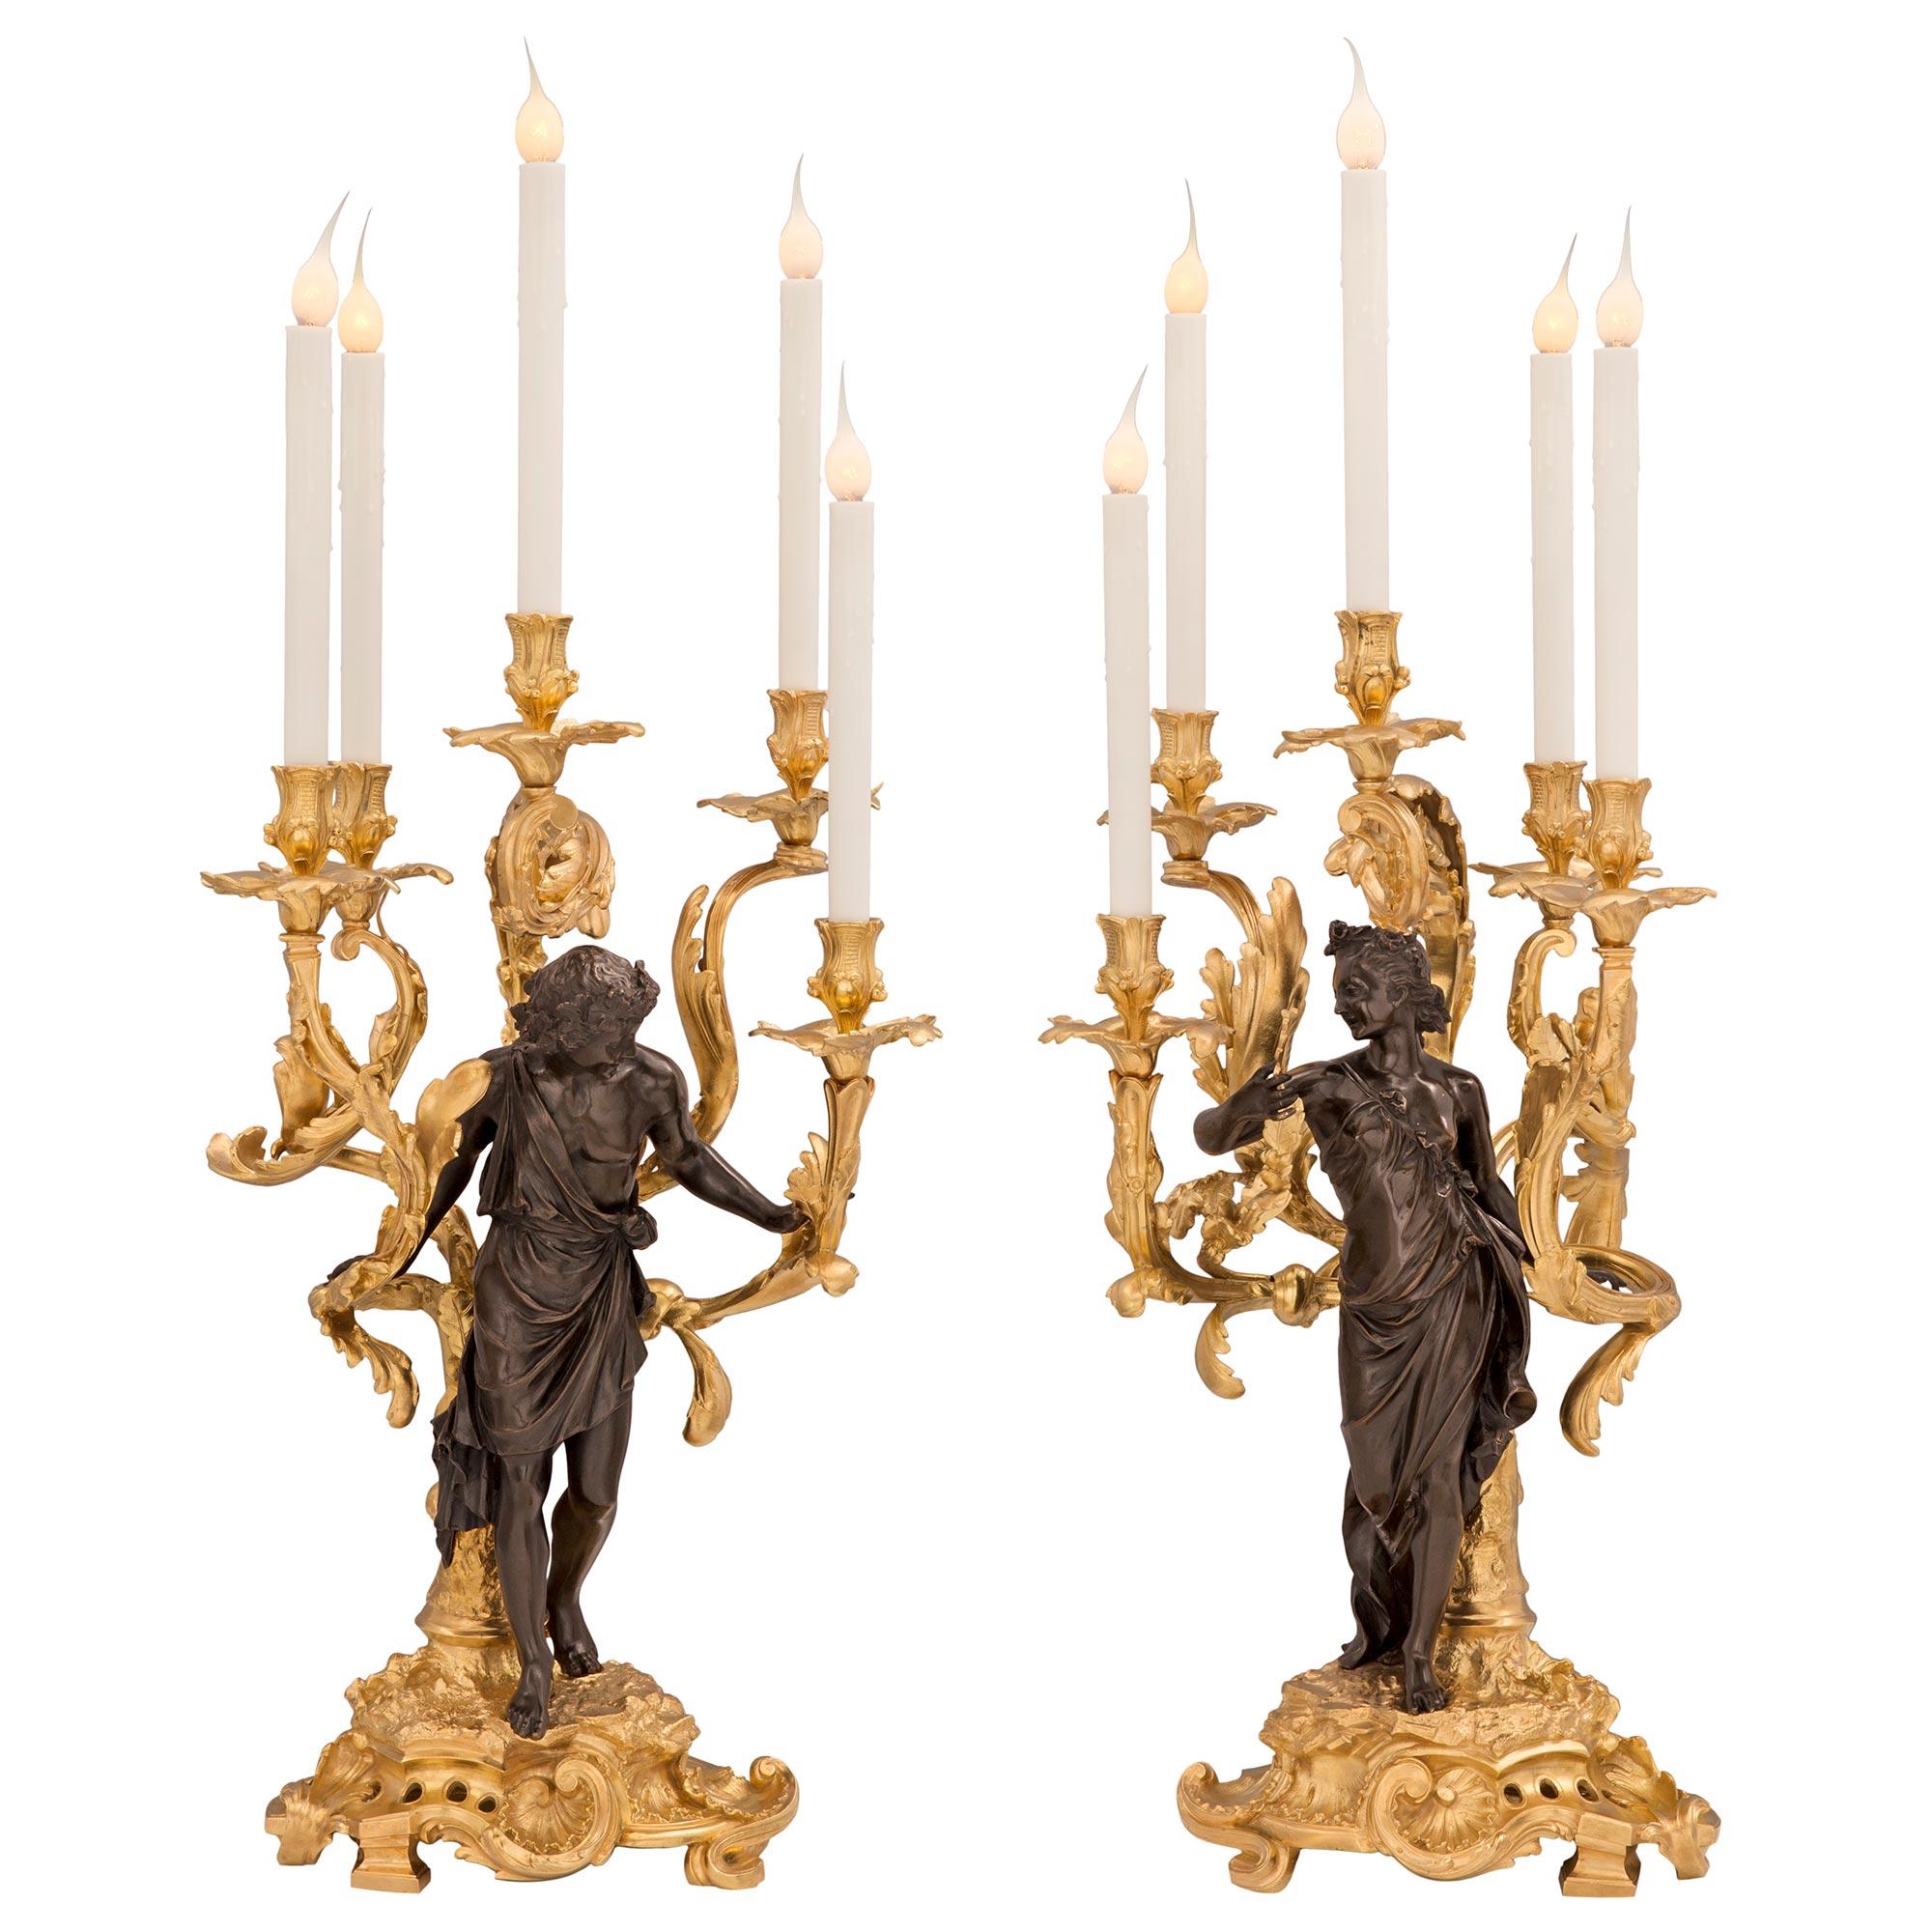 A stunning and extremely high quality true pair of French 19th century Louis XV st. patinated bronze and ormolu lamps. Each five arm candelabra lamp is raised by a sensational pierced Rocaille ground like designed base with a beautiful scrolled